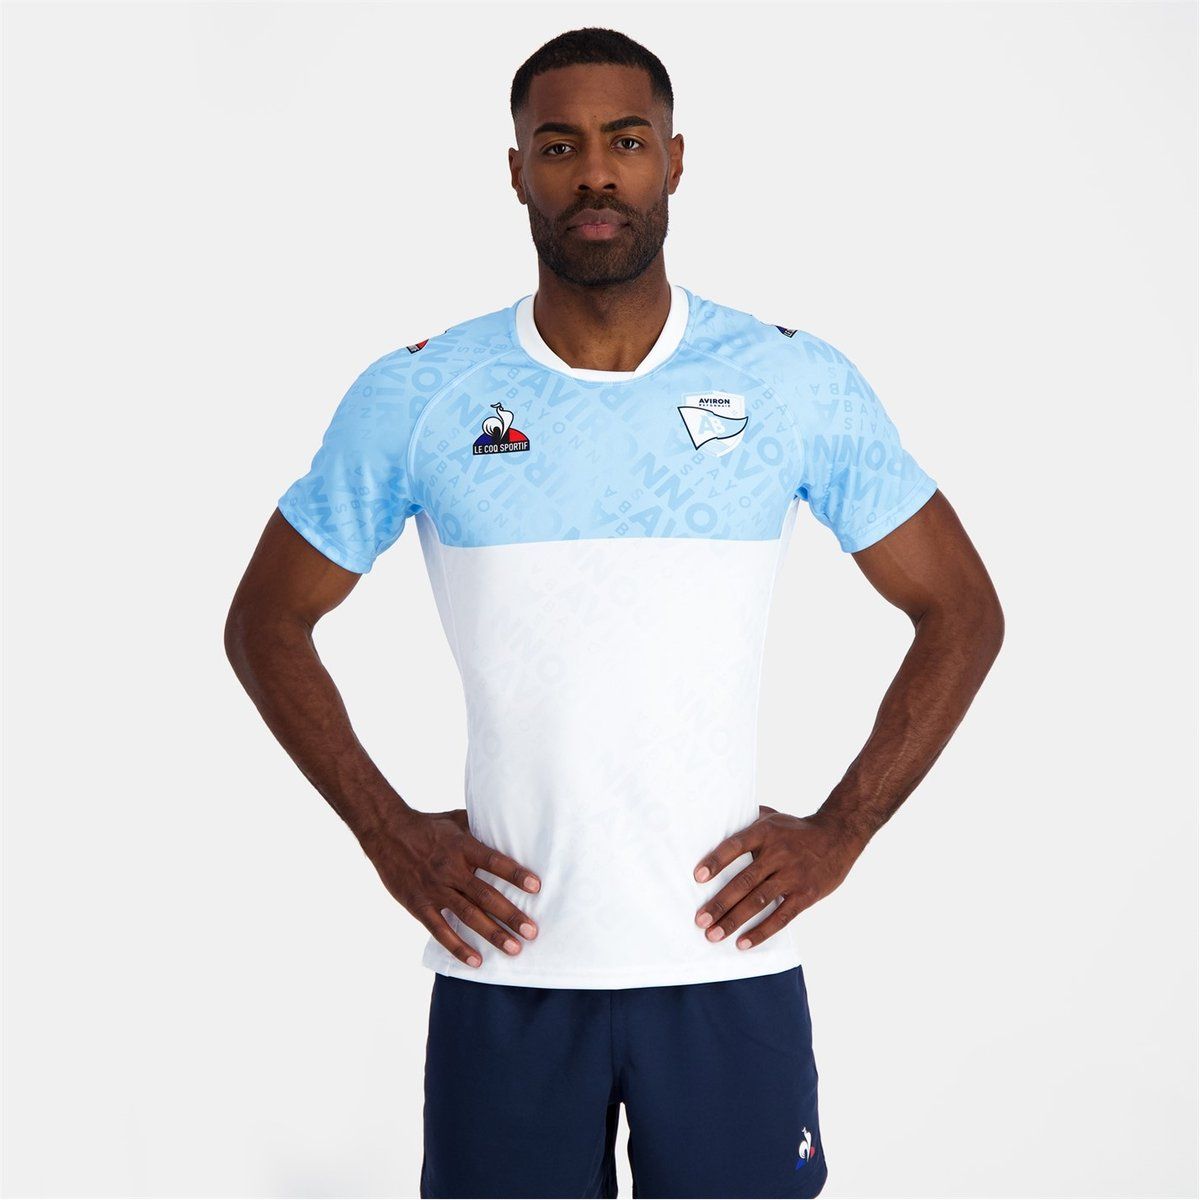 Official Top 14 Rugby Shirts and Clothing